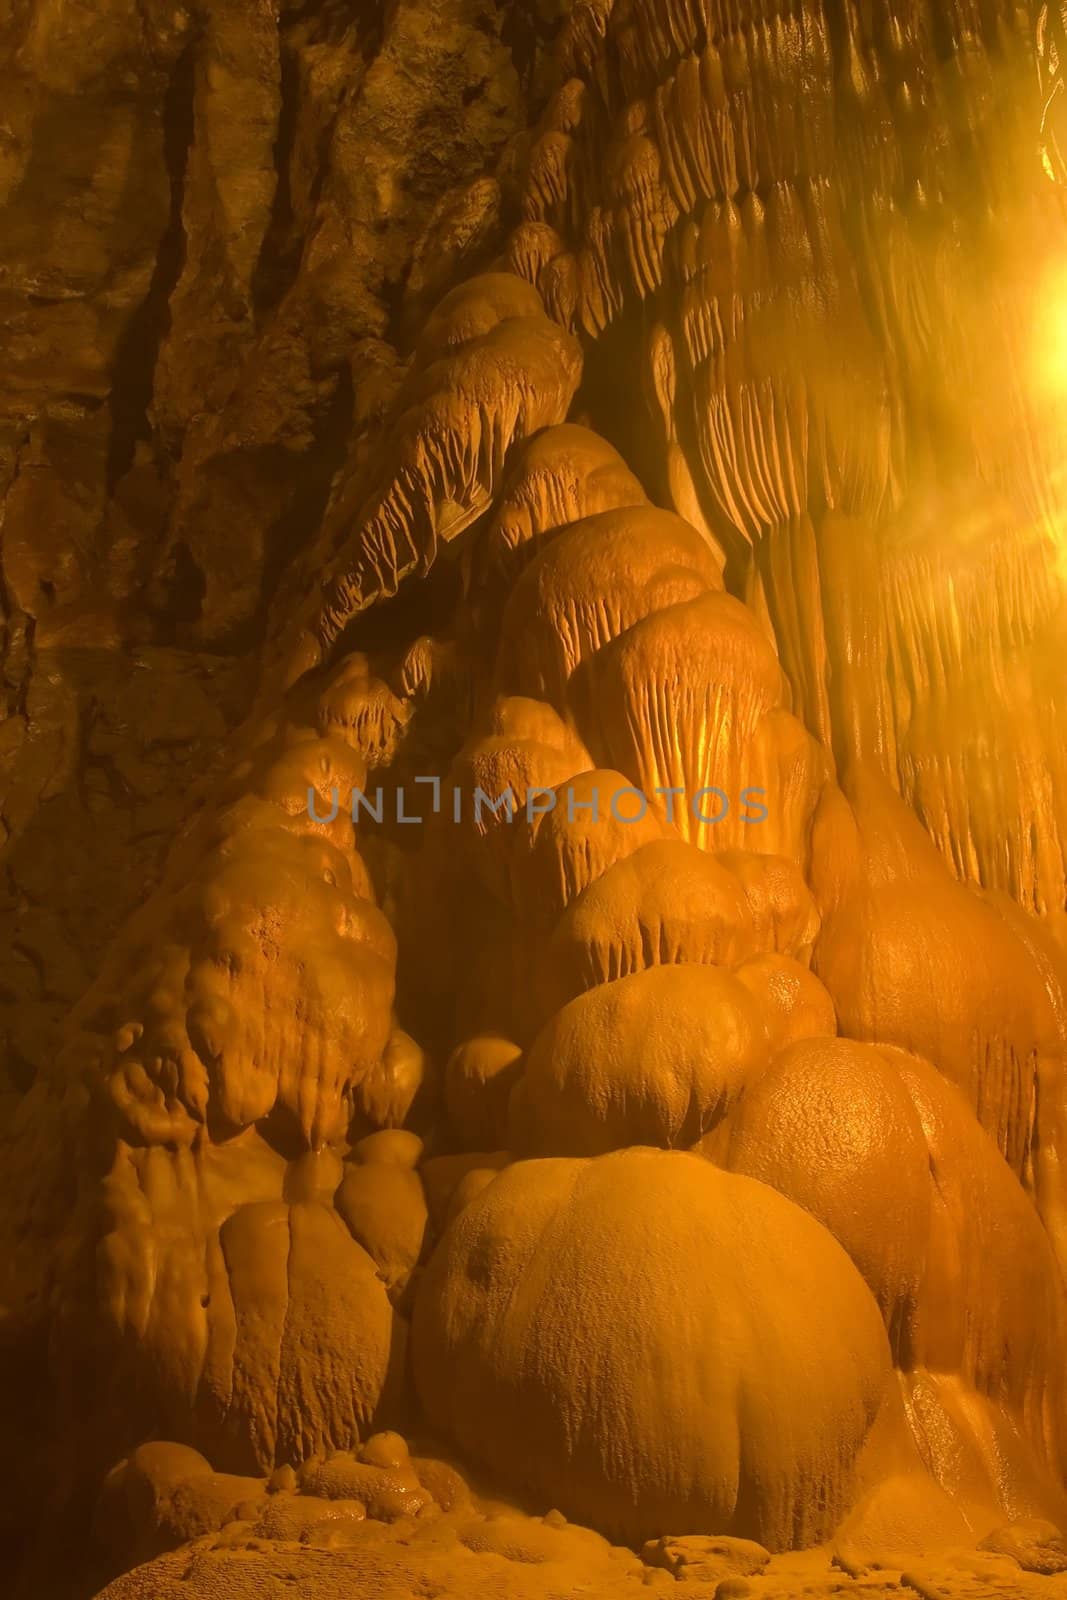 Moaning Cavern is a limestone cave located near Vallecito, California in the heart of the state's Gold Country.